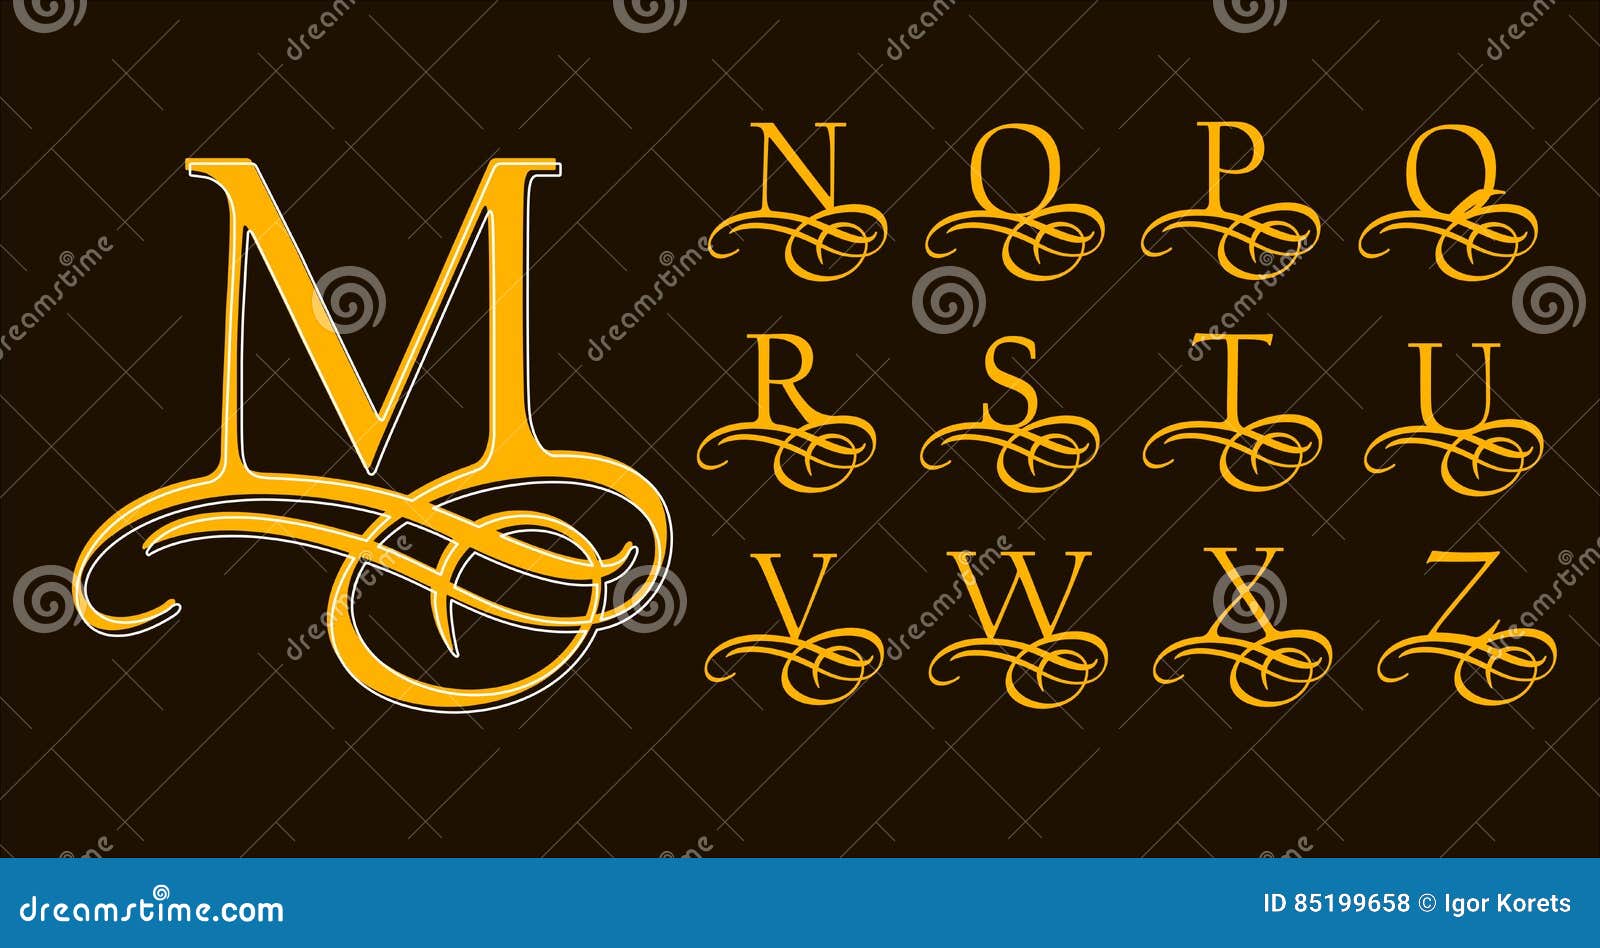 vintage set 2. calligraphic capital letters with curls for monograms and logos.